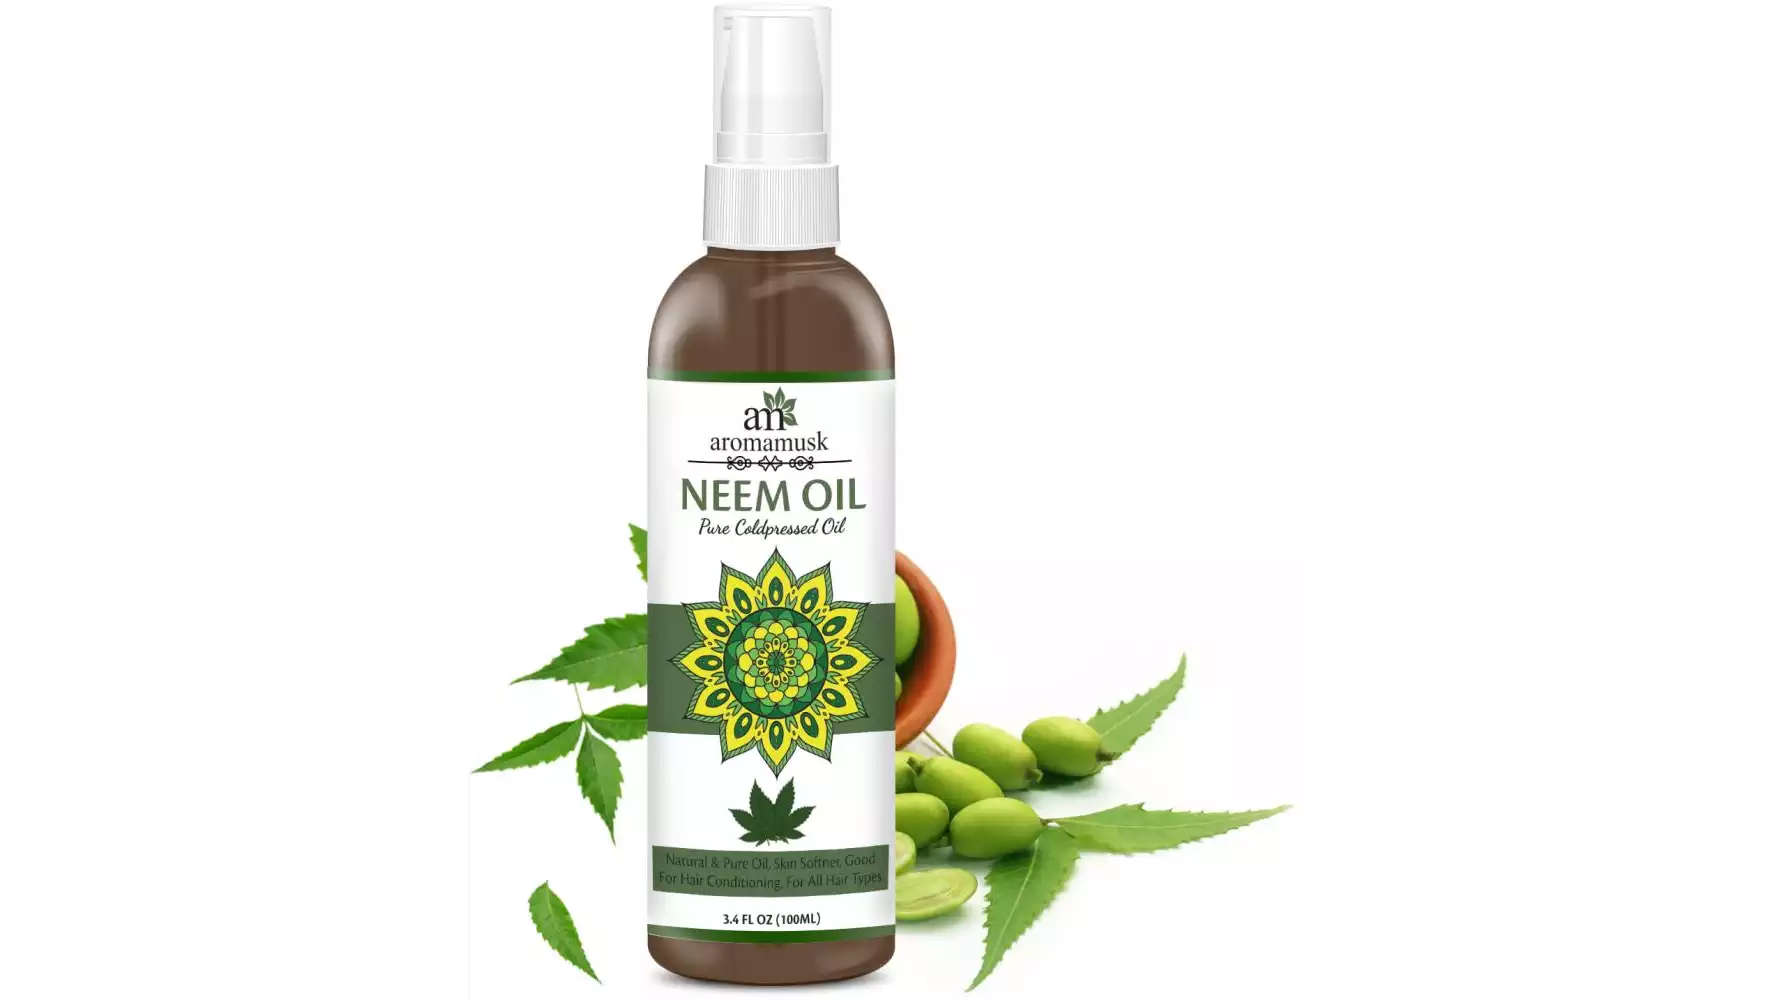 AromaMusk USDA Organic 100% Pure Cold Pressed Neem Oil For Hair, Skin & Nails - Natural Insect Repellent (100ml)